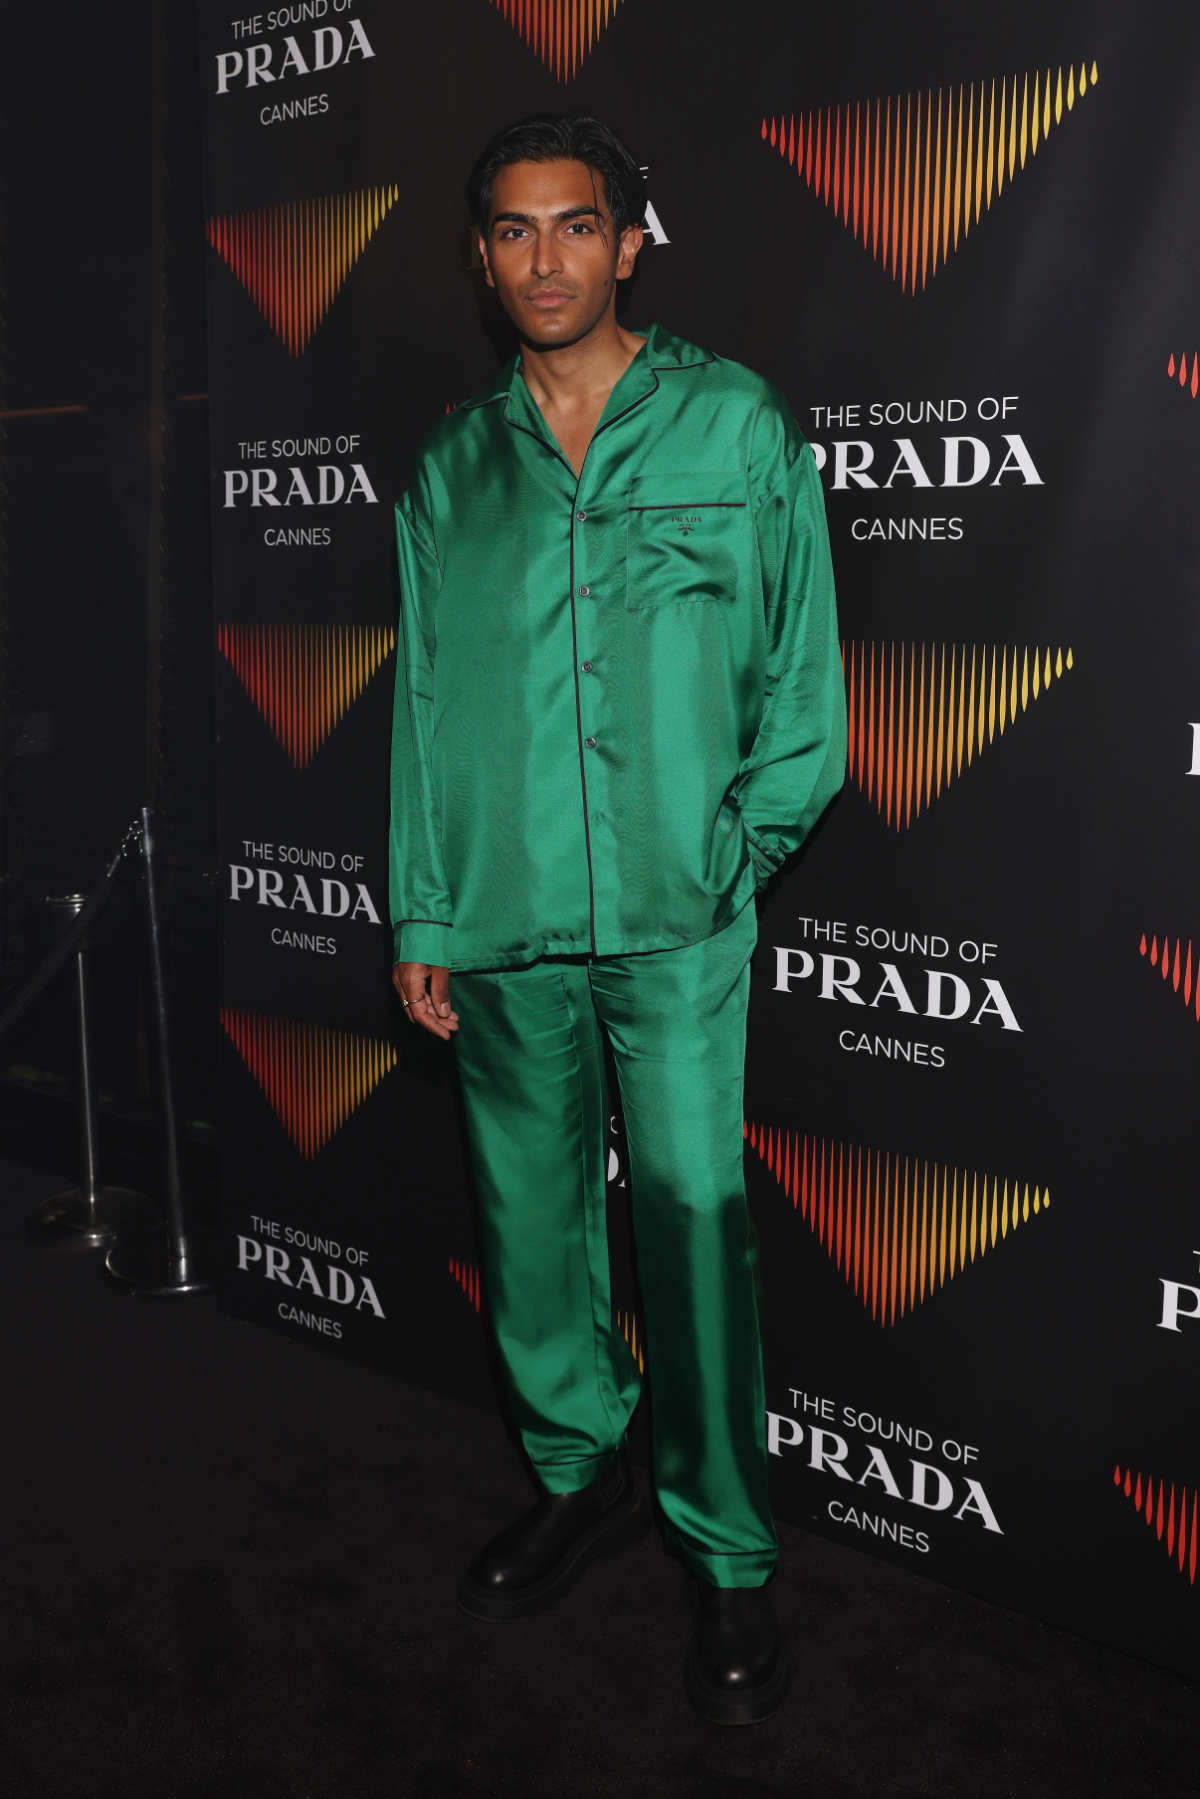 'The Sound Of Prada' - 24-25 May 2022 In Cannes